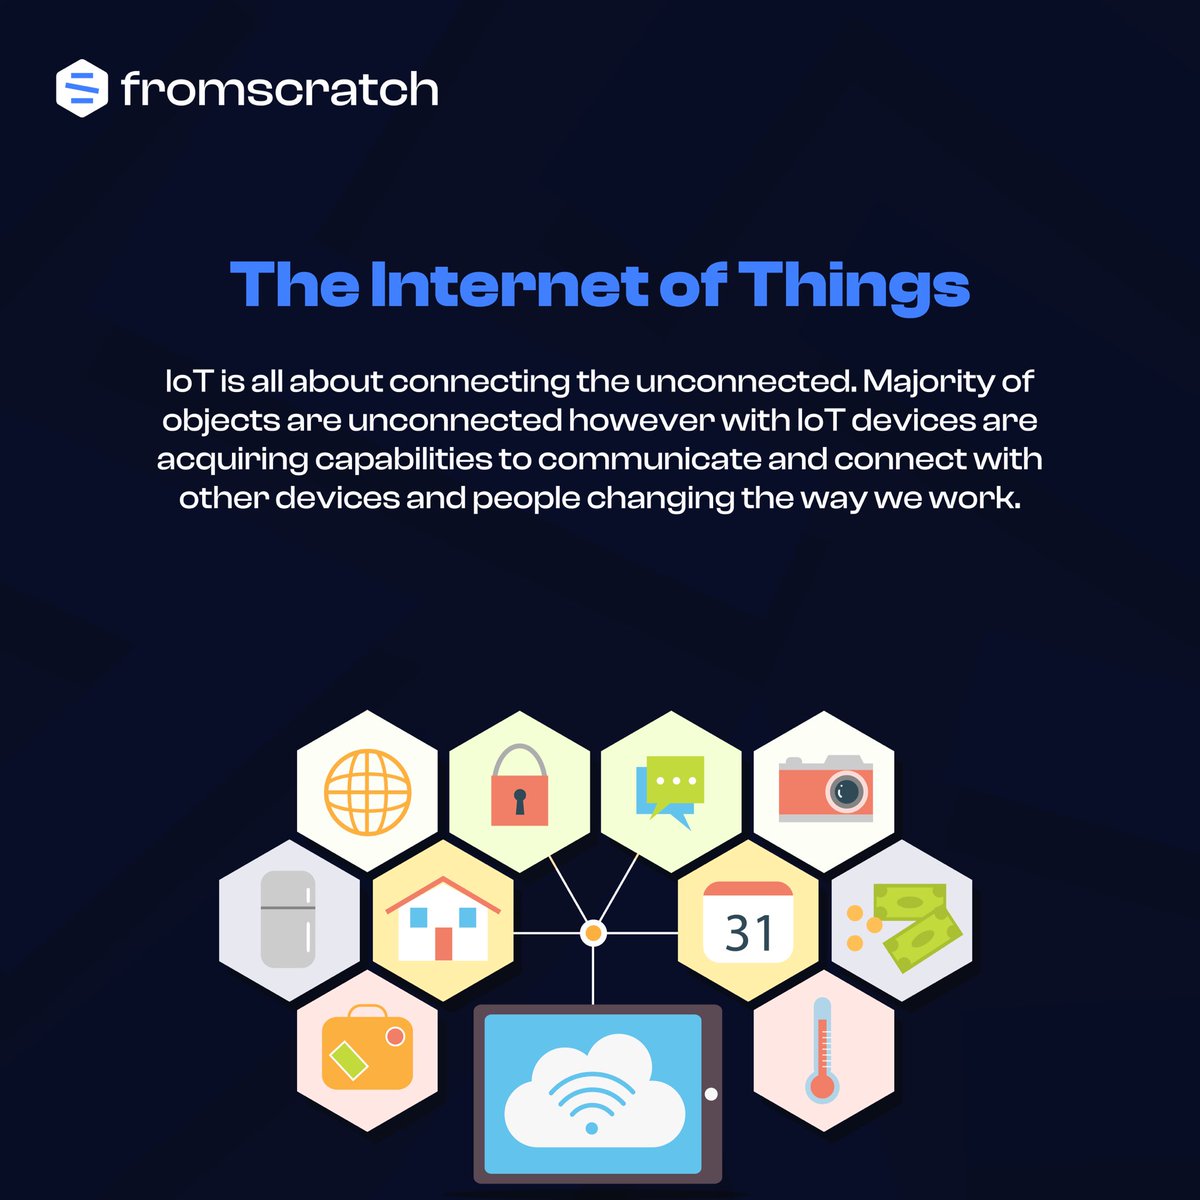 IoT (Internet of Things) can assist in connecting skilled creatives with founders by creating a digital ecosystem that facilitates collaboration and innovation. 

Stay connected😉.

#network #IoT #startup #connection #opportunities #tech #techcommunity